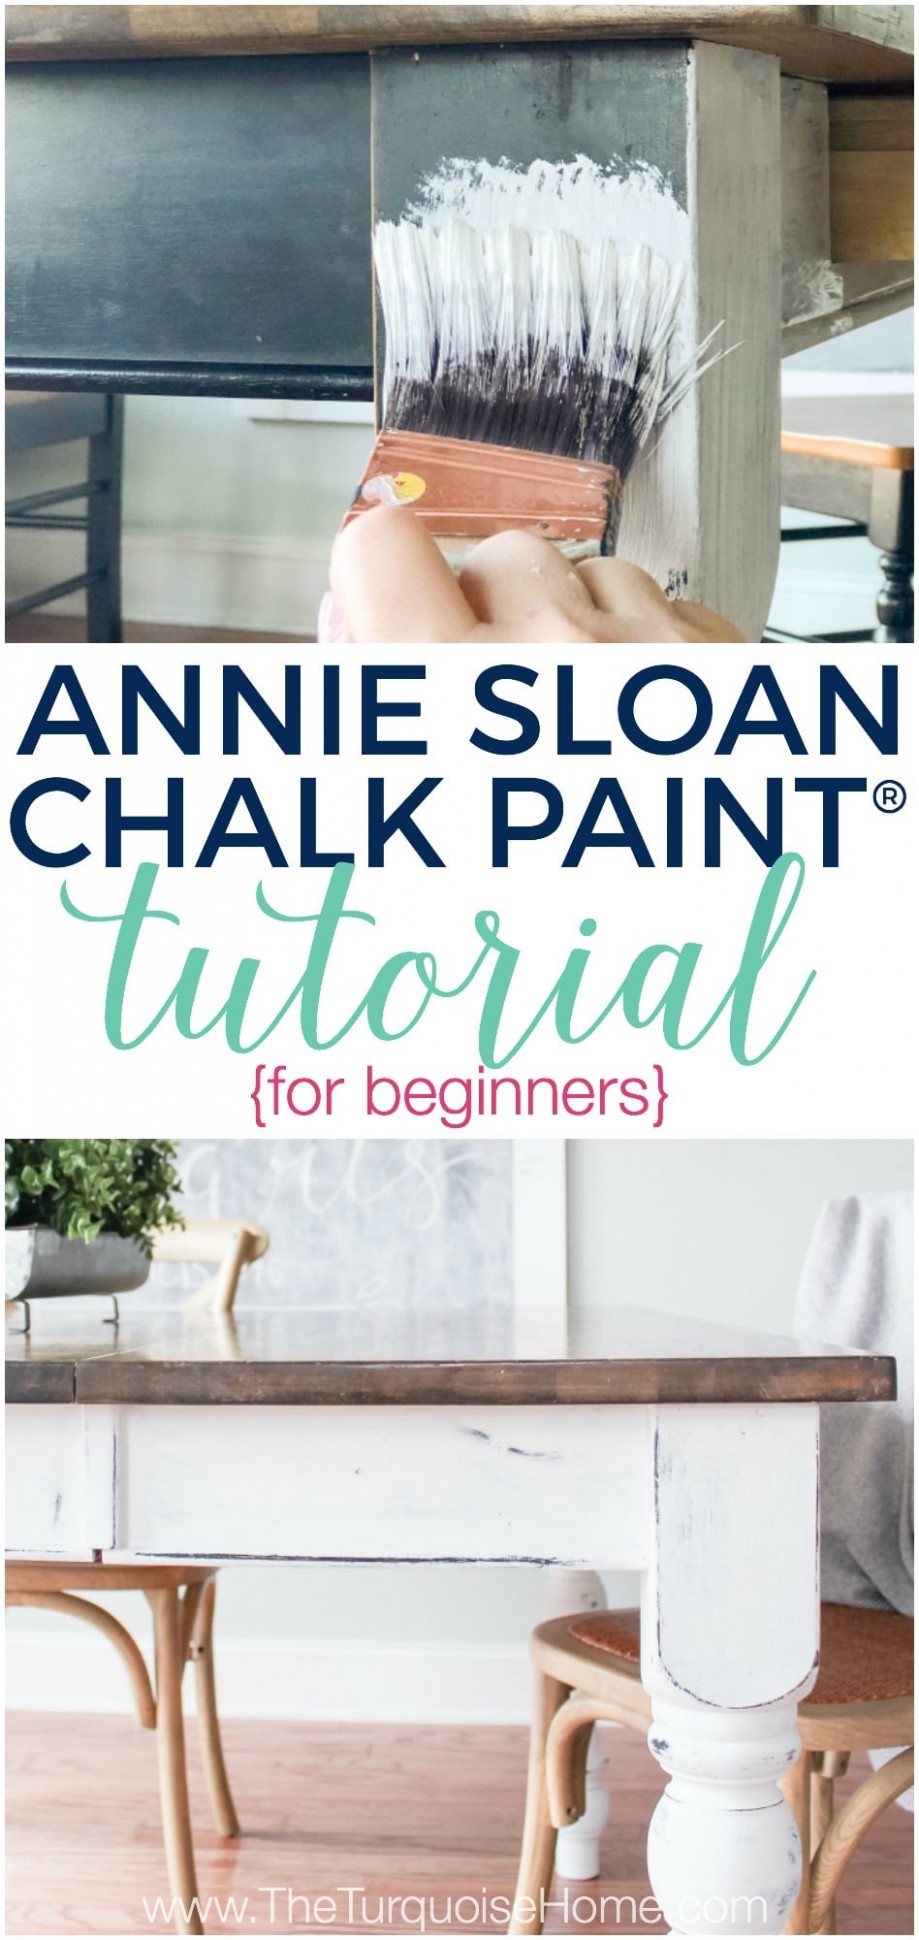 How To Use Annie Sloan Chalk Paint (perfect For Beginners!) Where To Buy Annie Sloan Chalk Paint In Victoria Bc